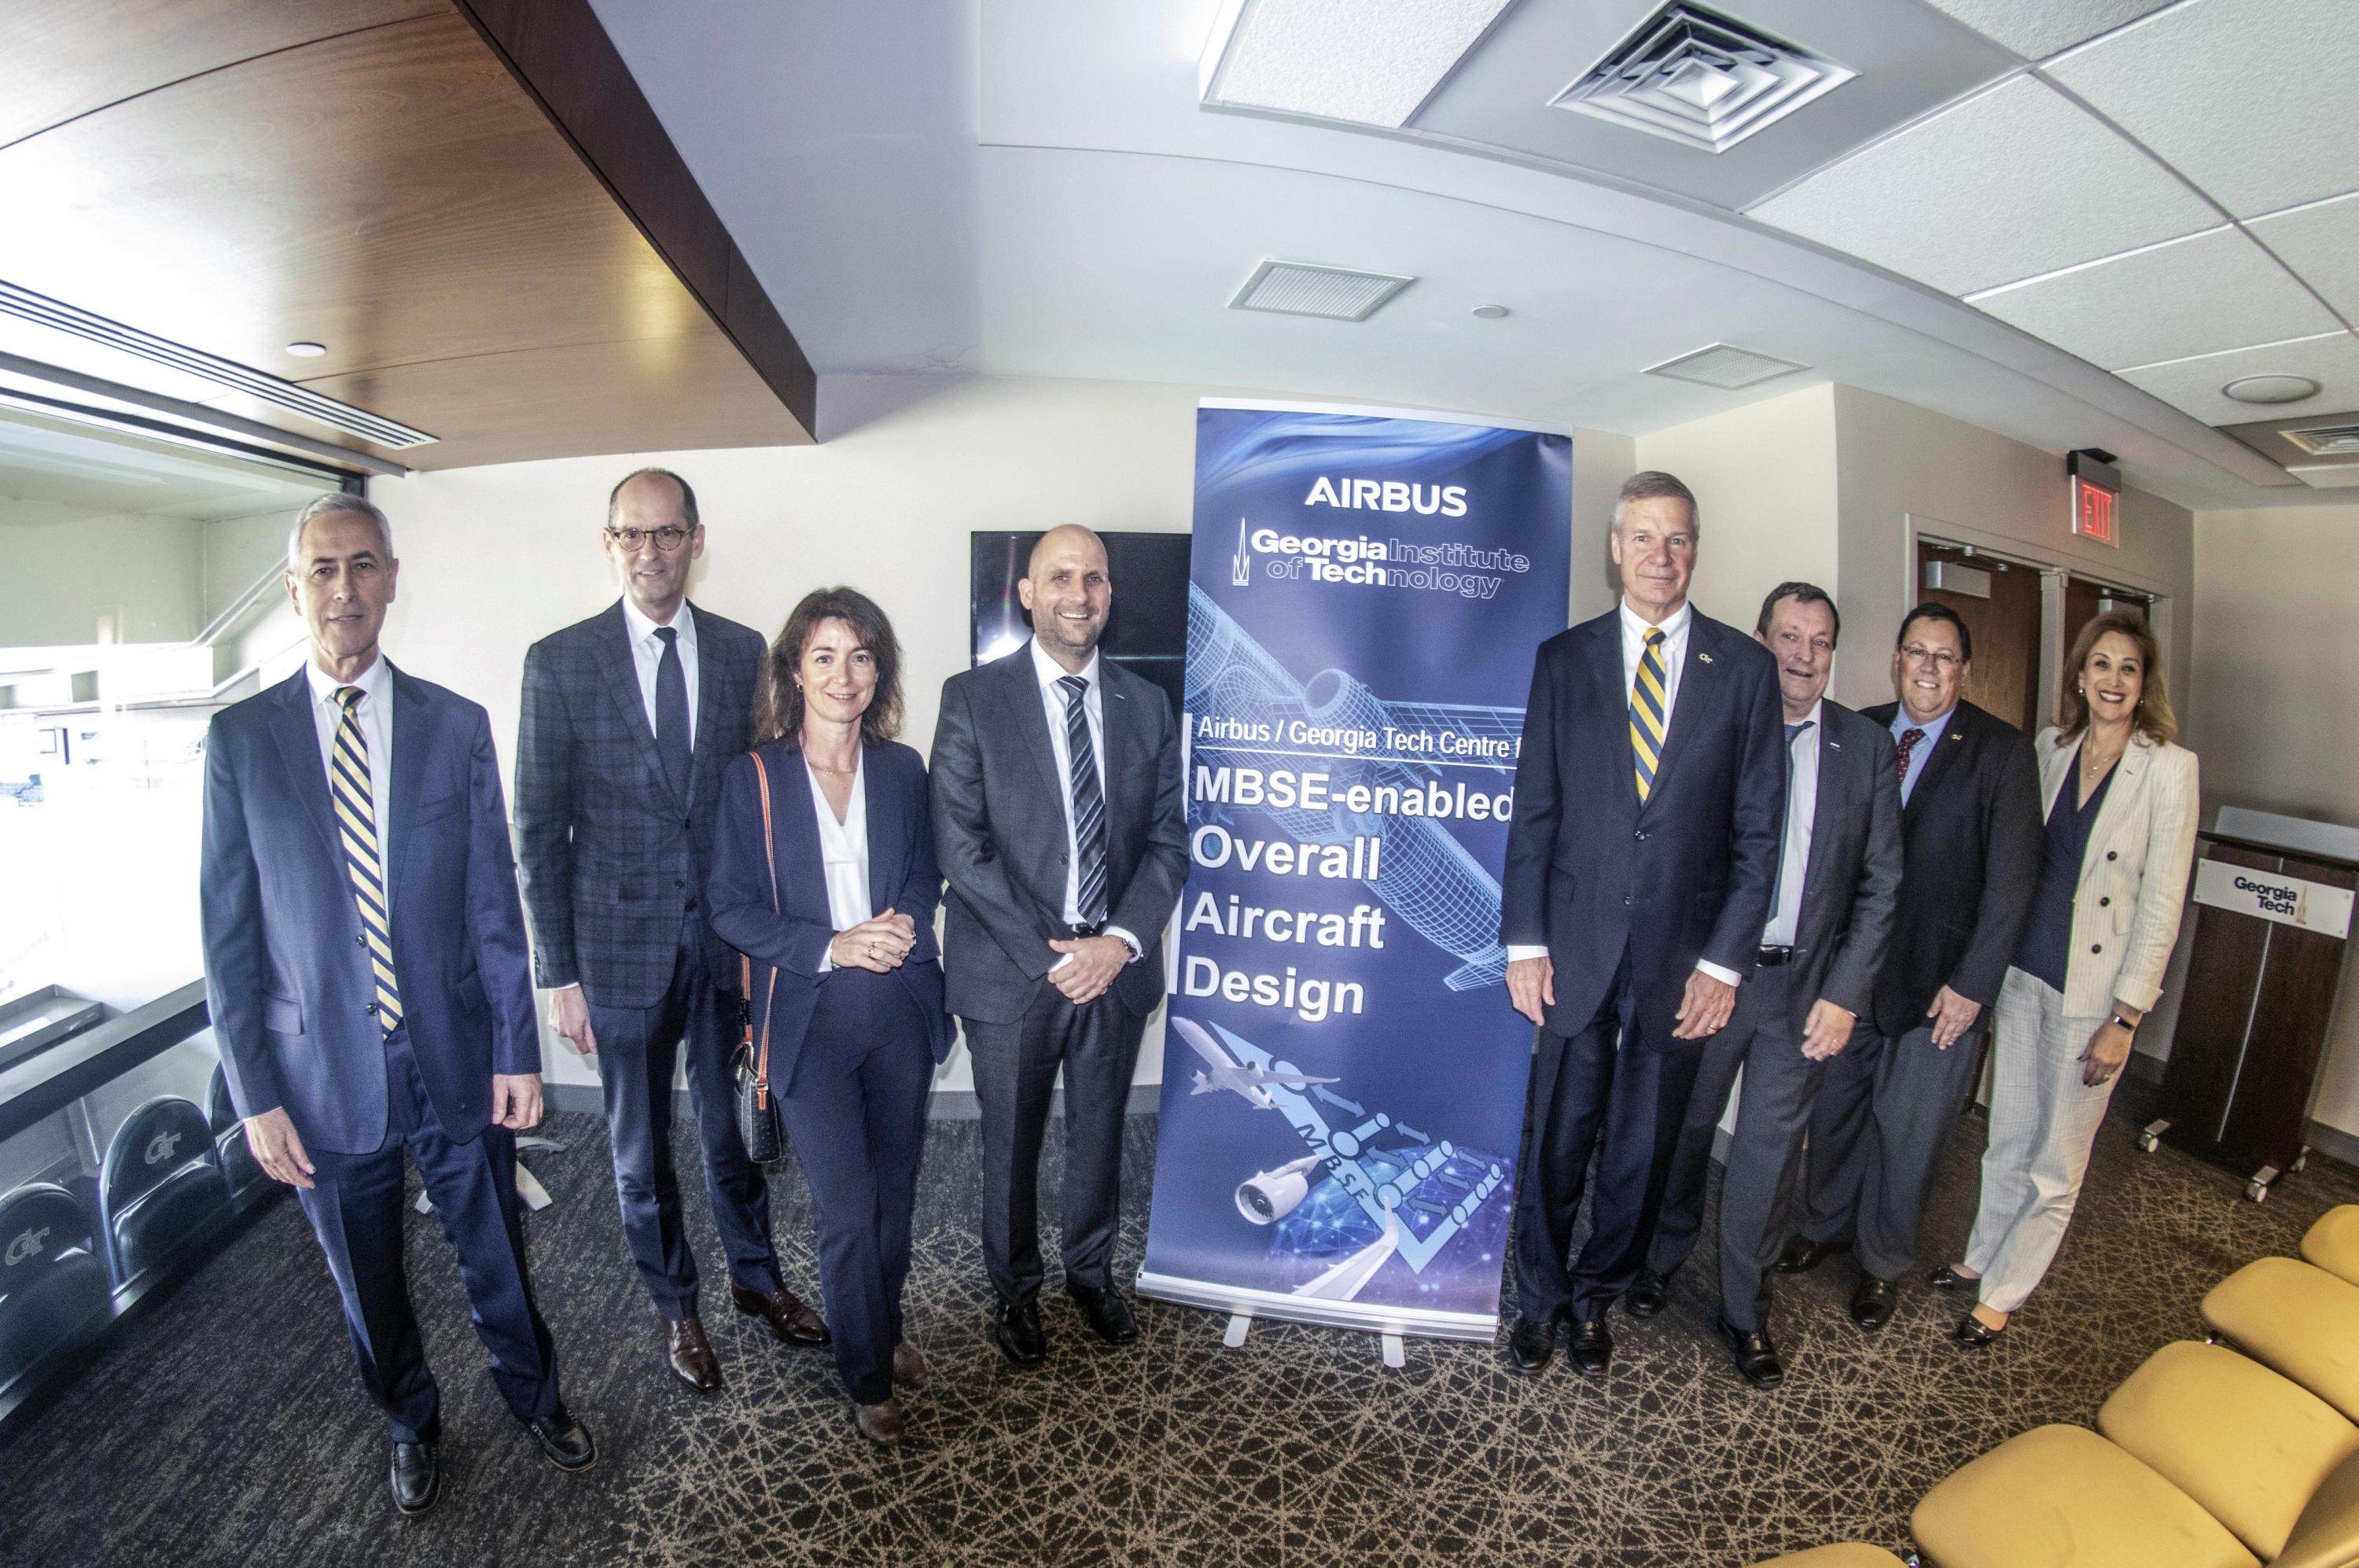 Officials from Airbus and the Georgia Institute of Technology met to celebrate opening of the new Model-Based Systems Engineering (MBSE)-enabled Overall Aircraft Design (OAD) center.